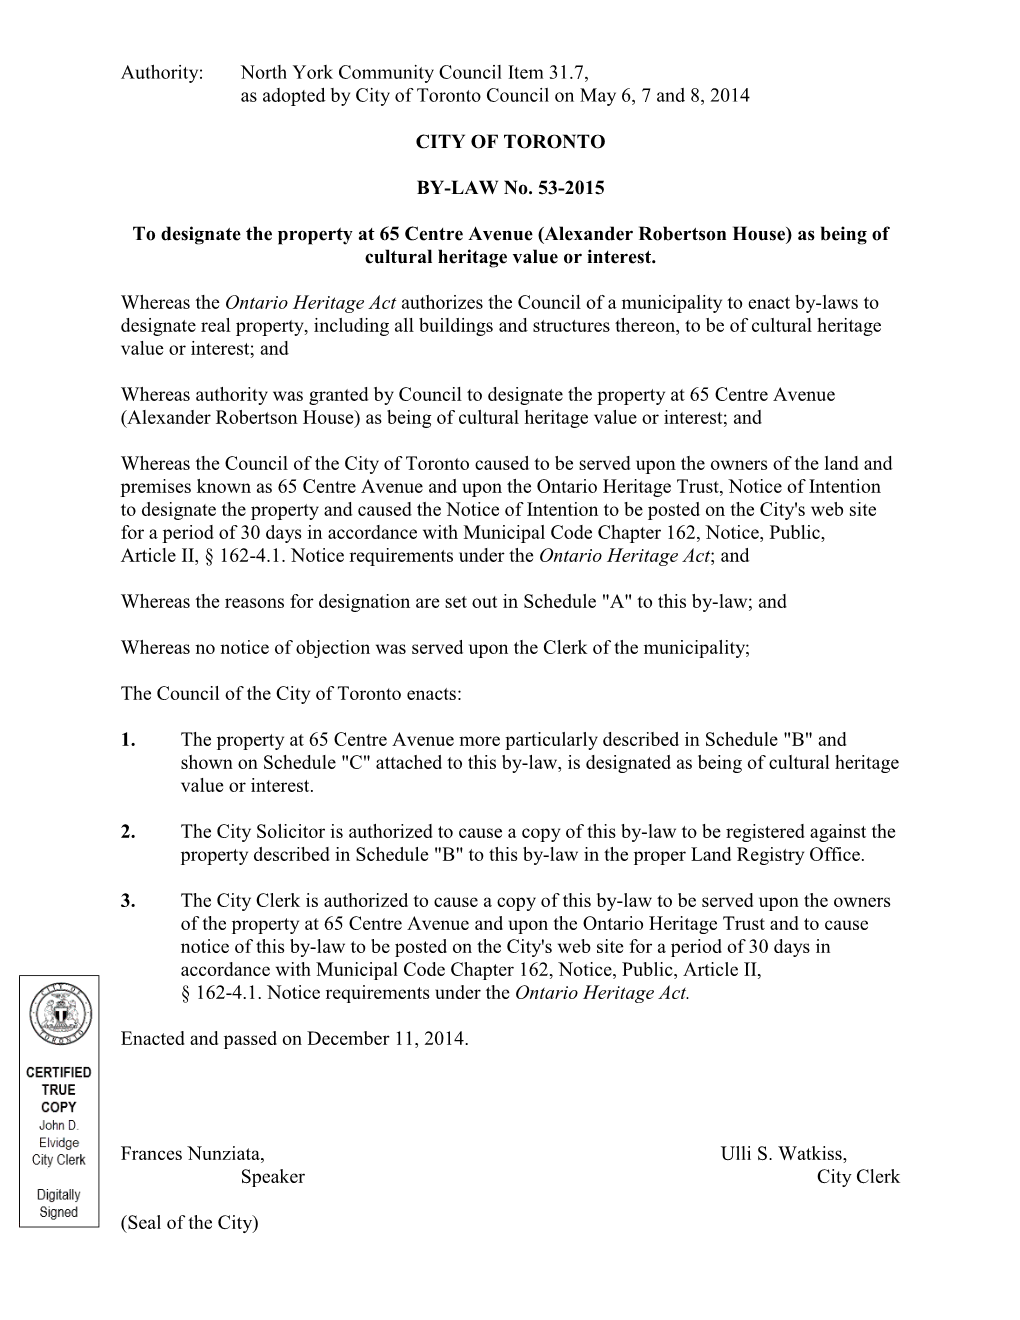 Authority: North York Community Council Item 31.7, As Adopted by City of Toronto Council on May 6, 7 and 8, 2014